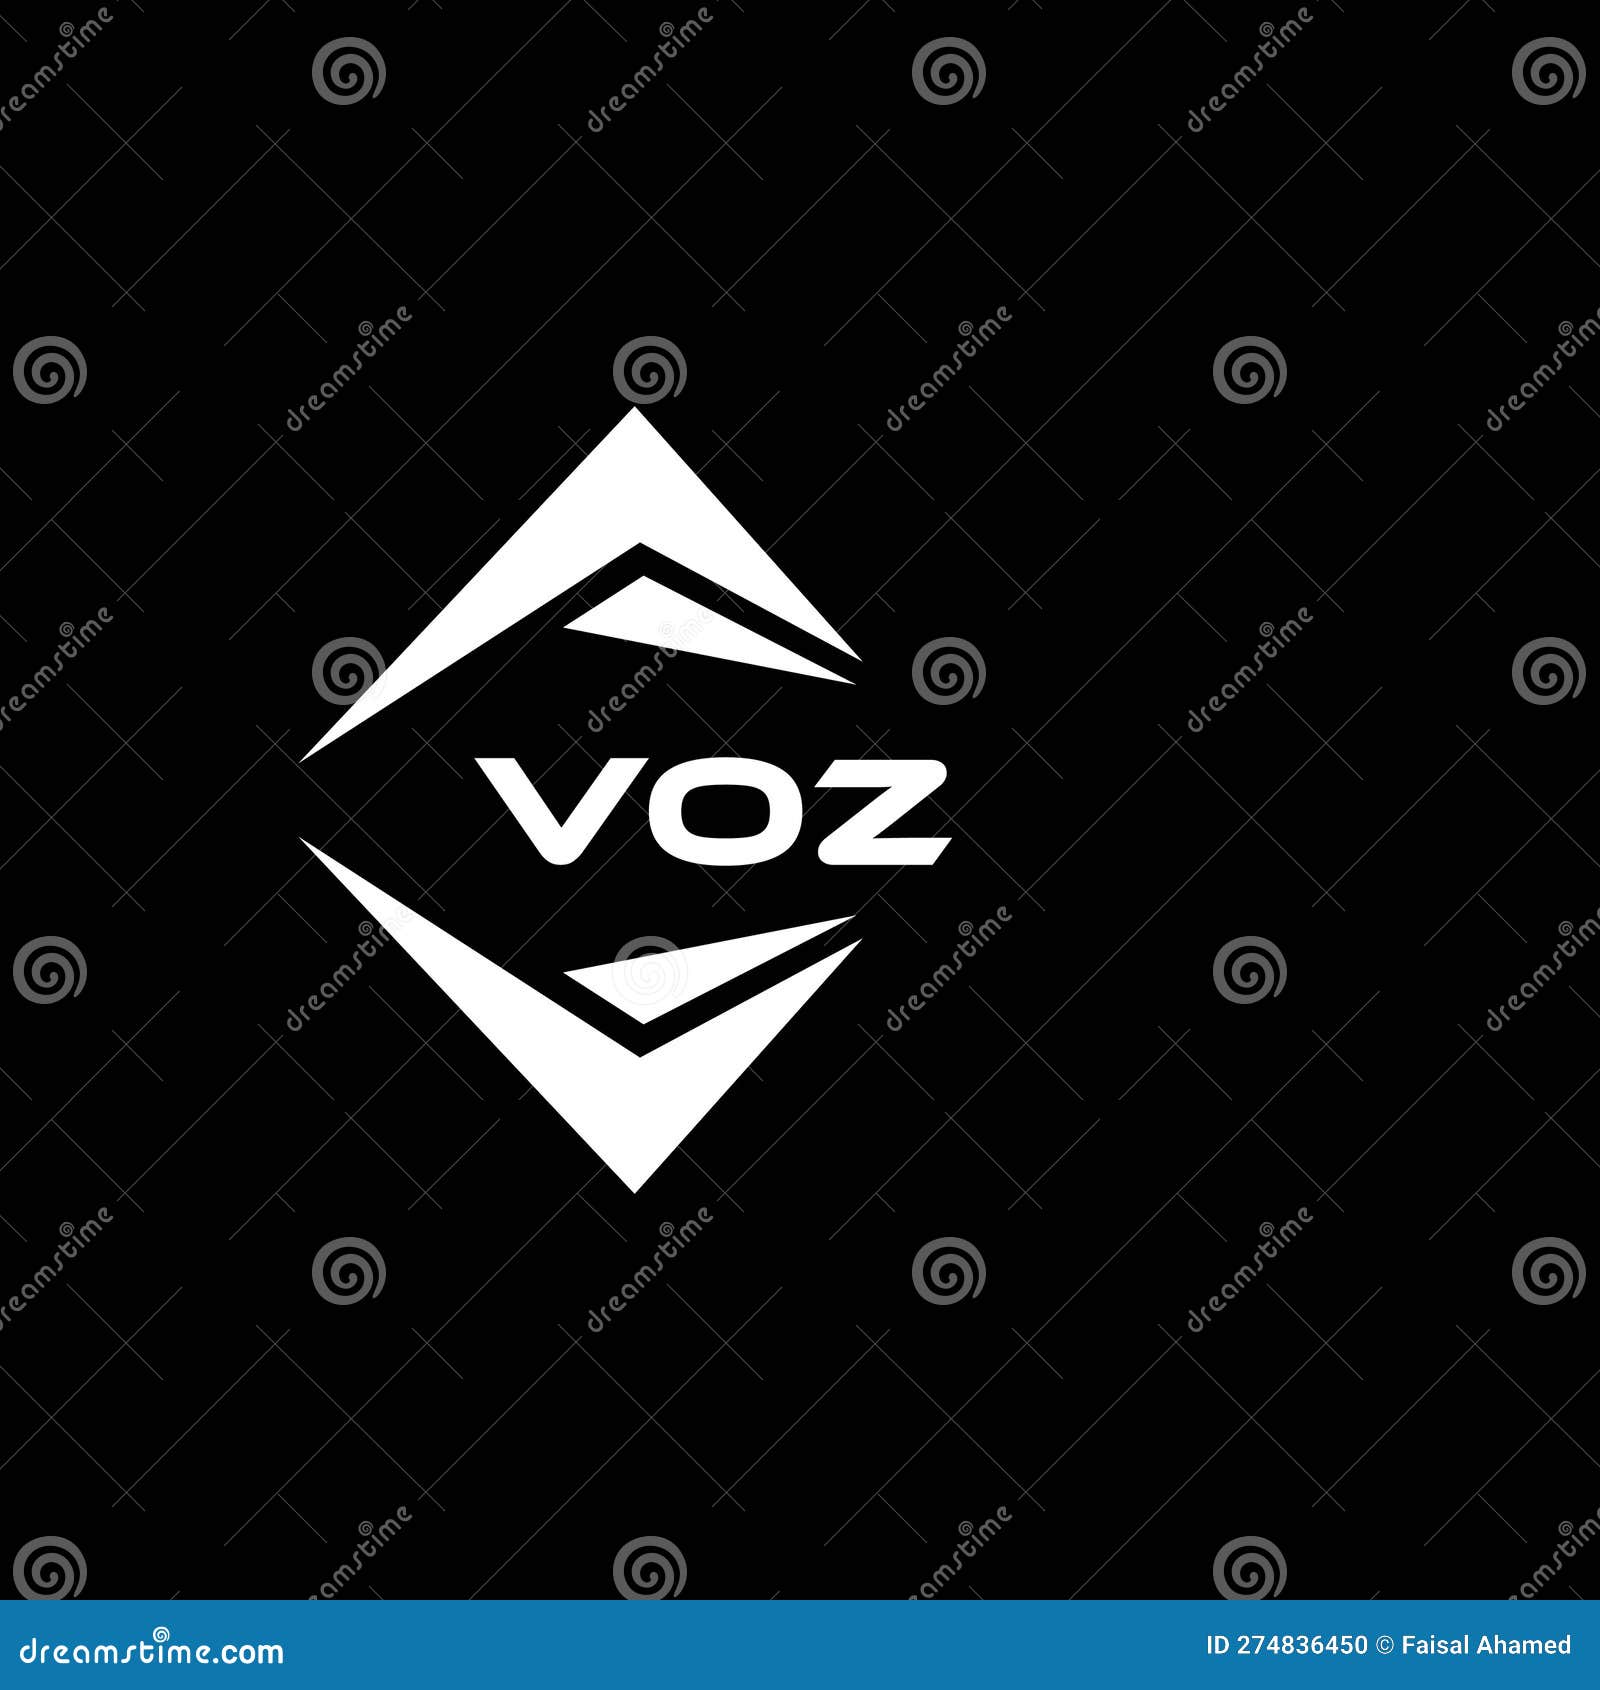 voz abstract technology logo  on black background. voz creative initials letter logo concept